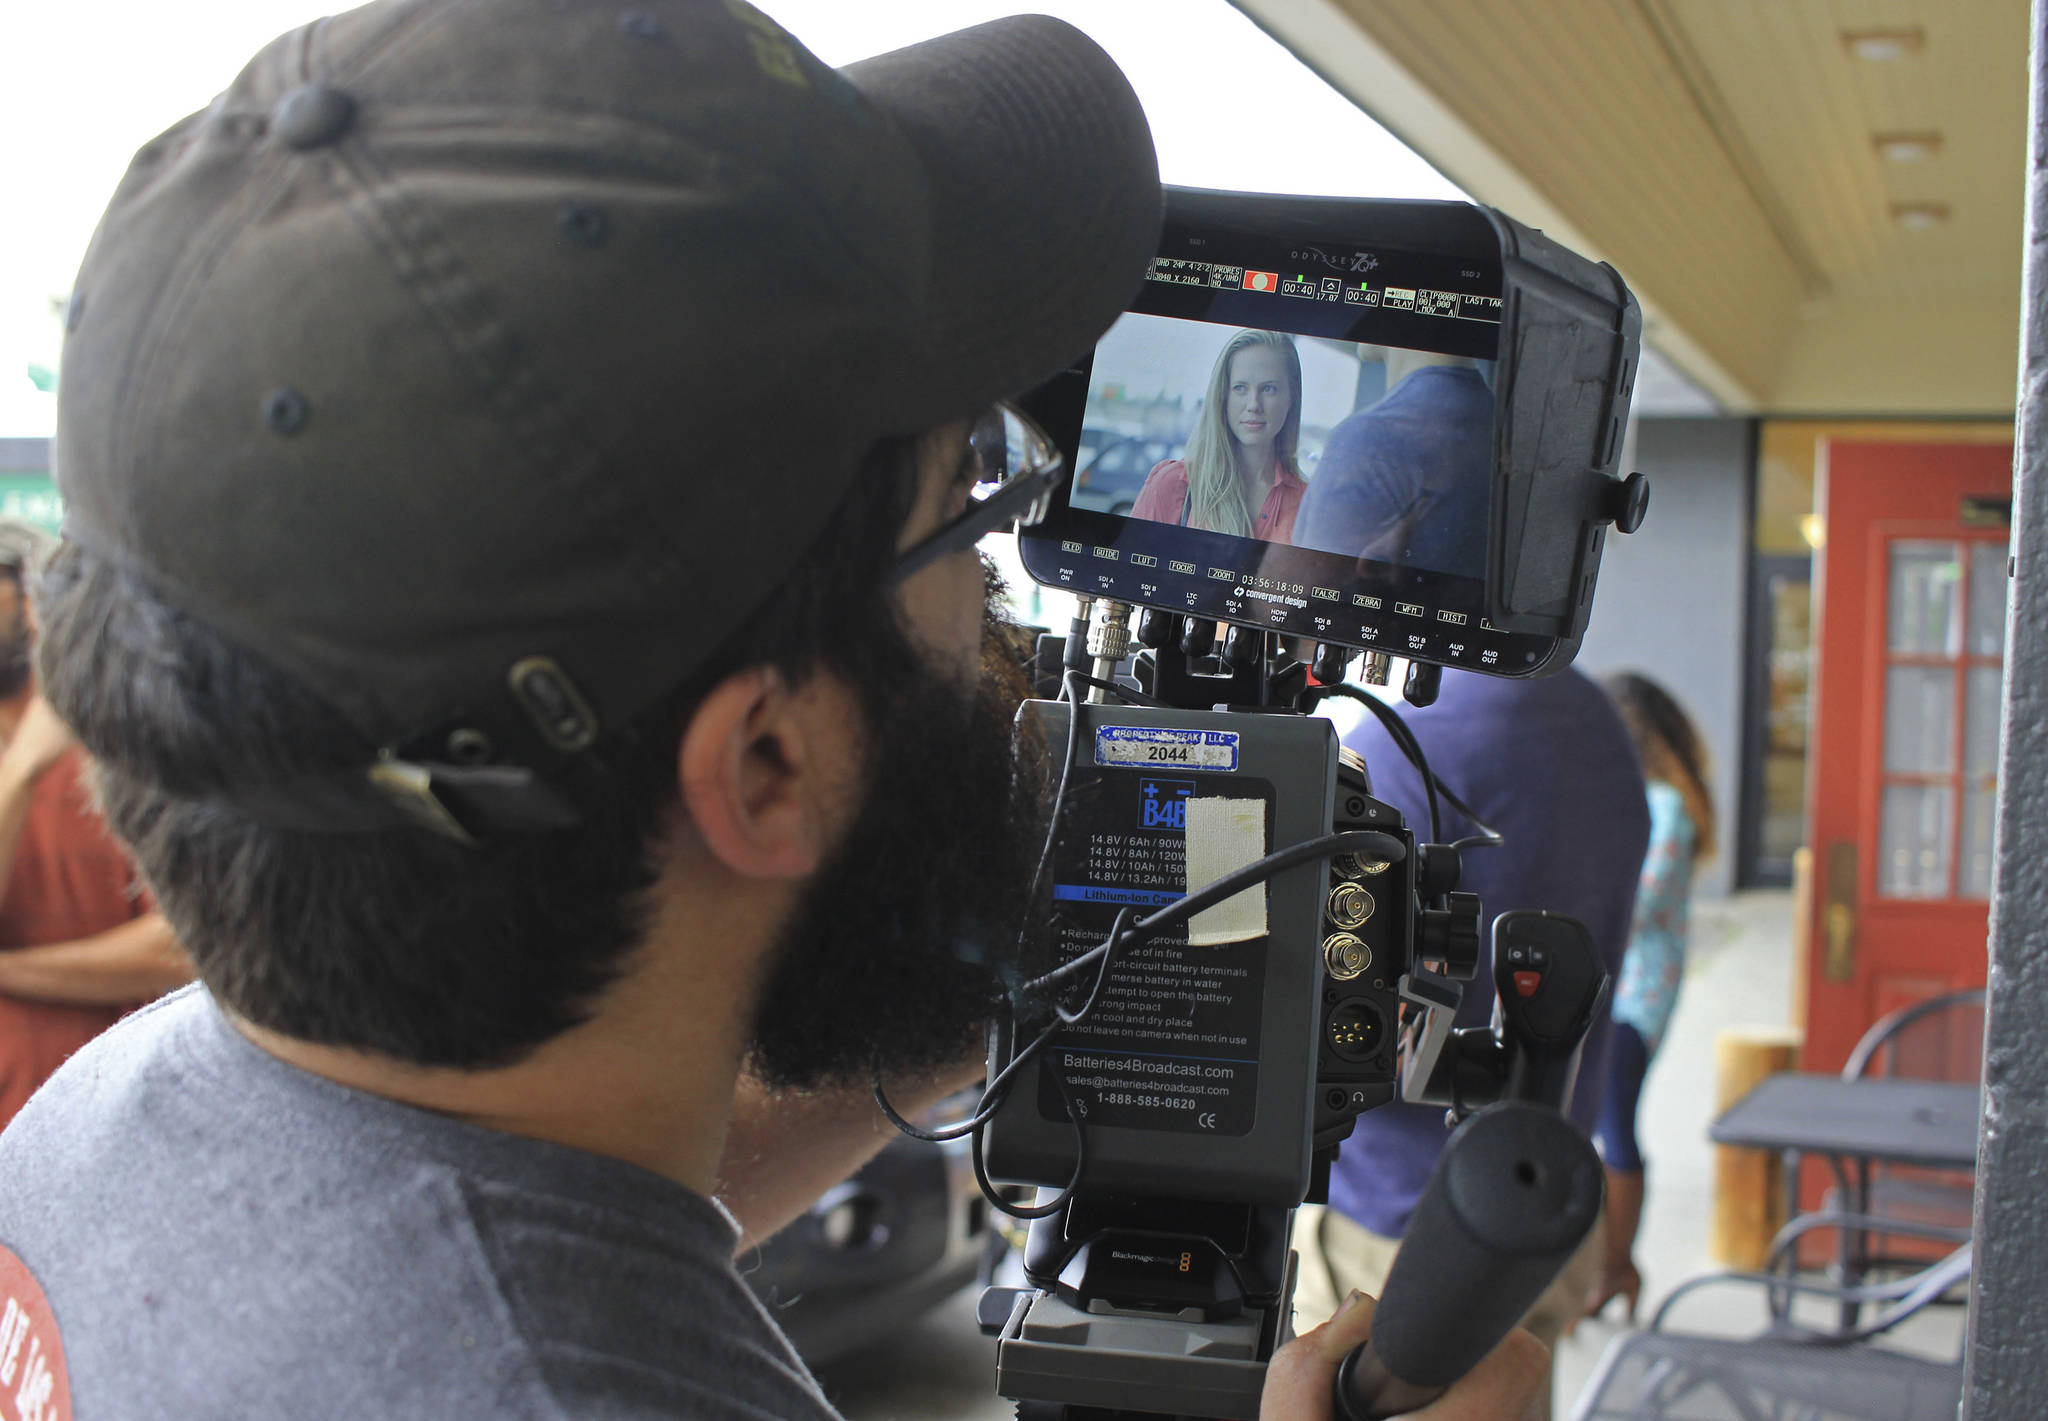 In an Aug. 9, 2017 photo, director of photography Michael Bergstrom films a scene from “Telltale,” featuring actress Carly Jones in Eagle River, Alaska. The film is one of two independent movies produced by Alaska filmmaker Charles Baird that were filmed in Eagle River the summer of 2017. (Kirsten Swann/Chugiak-Eagle River Star via AP)